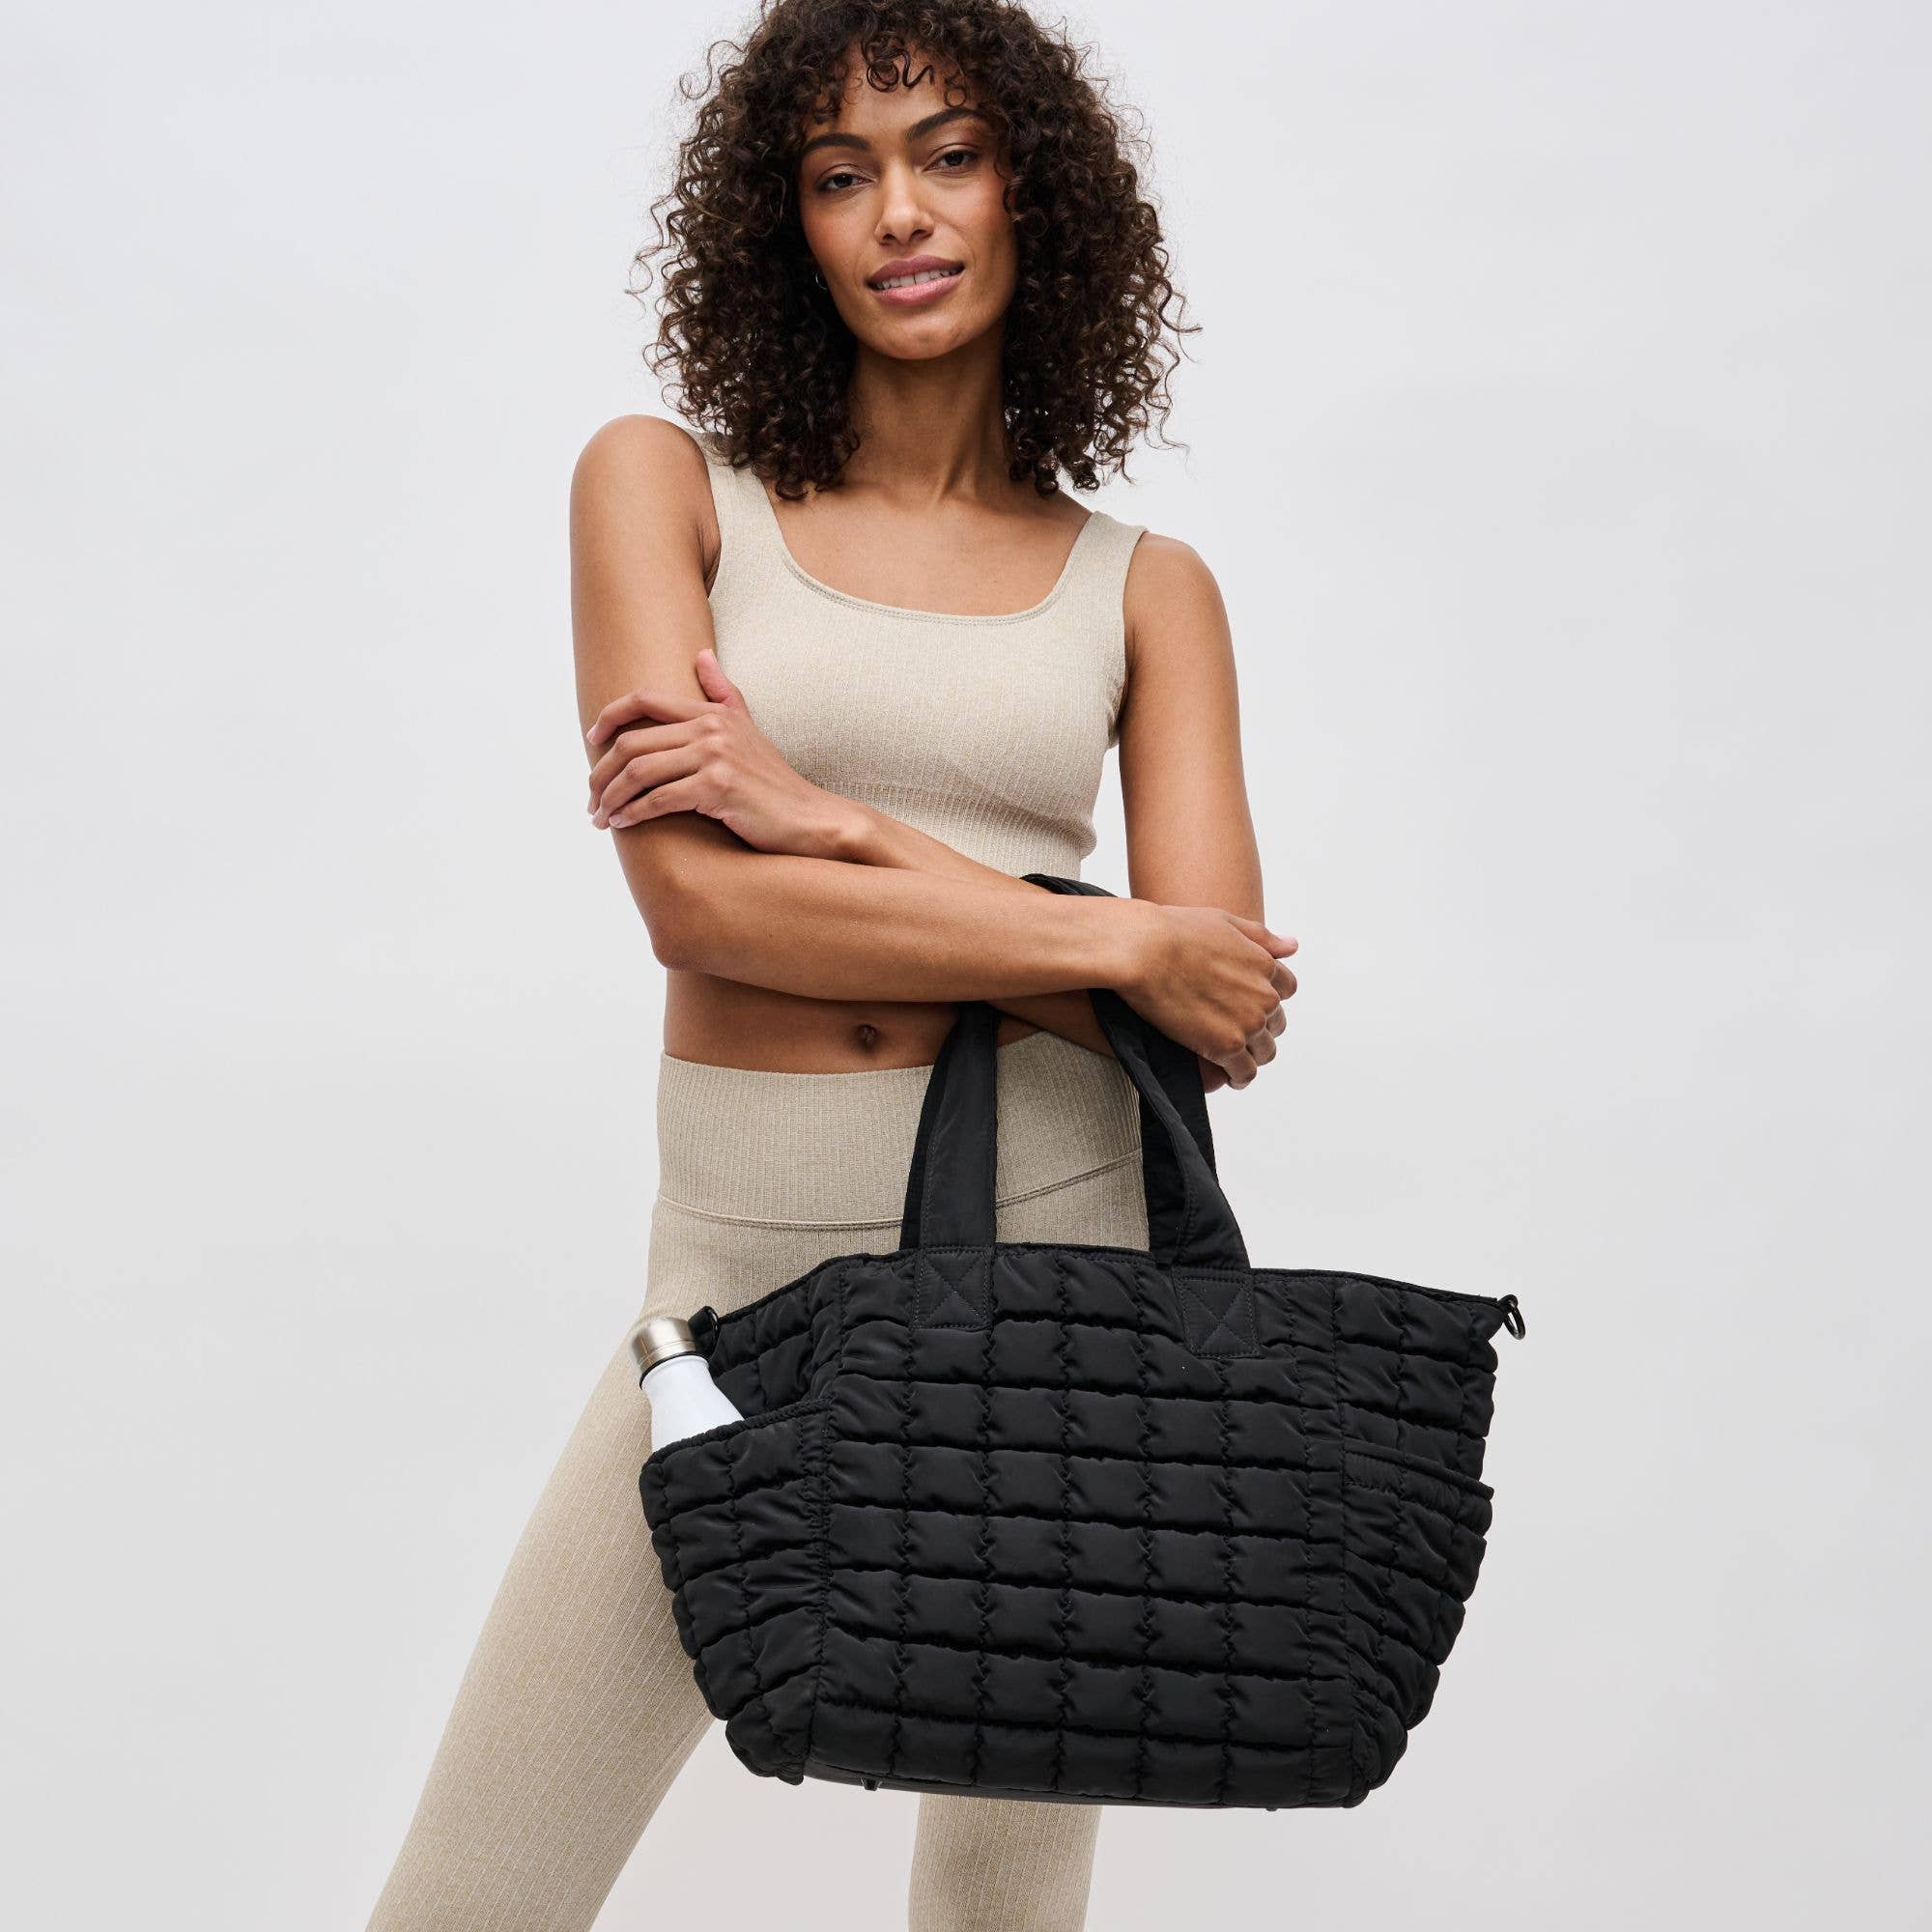 Dreamer - Quilted Nylon Tote: Black